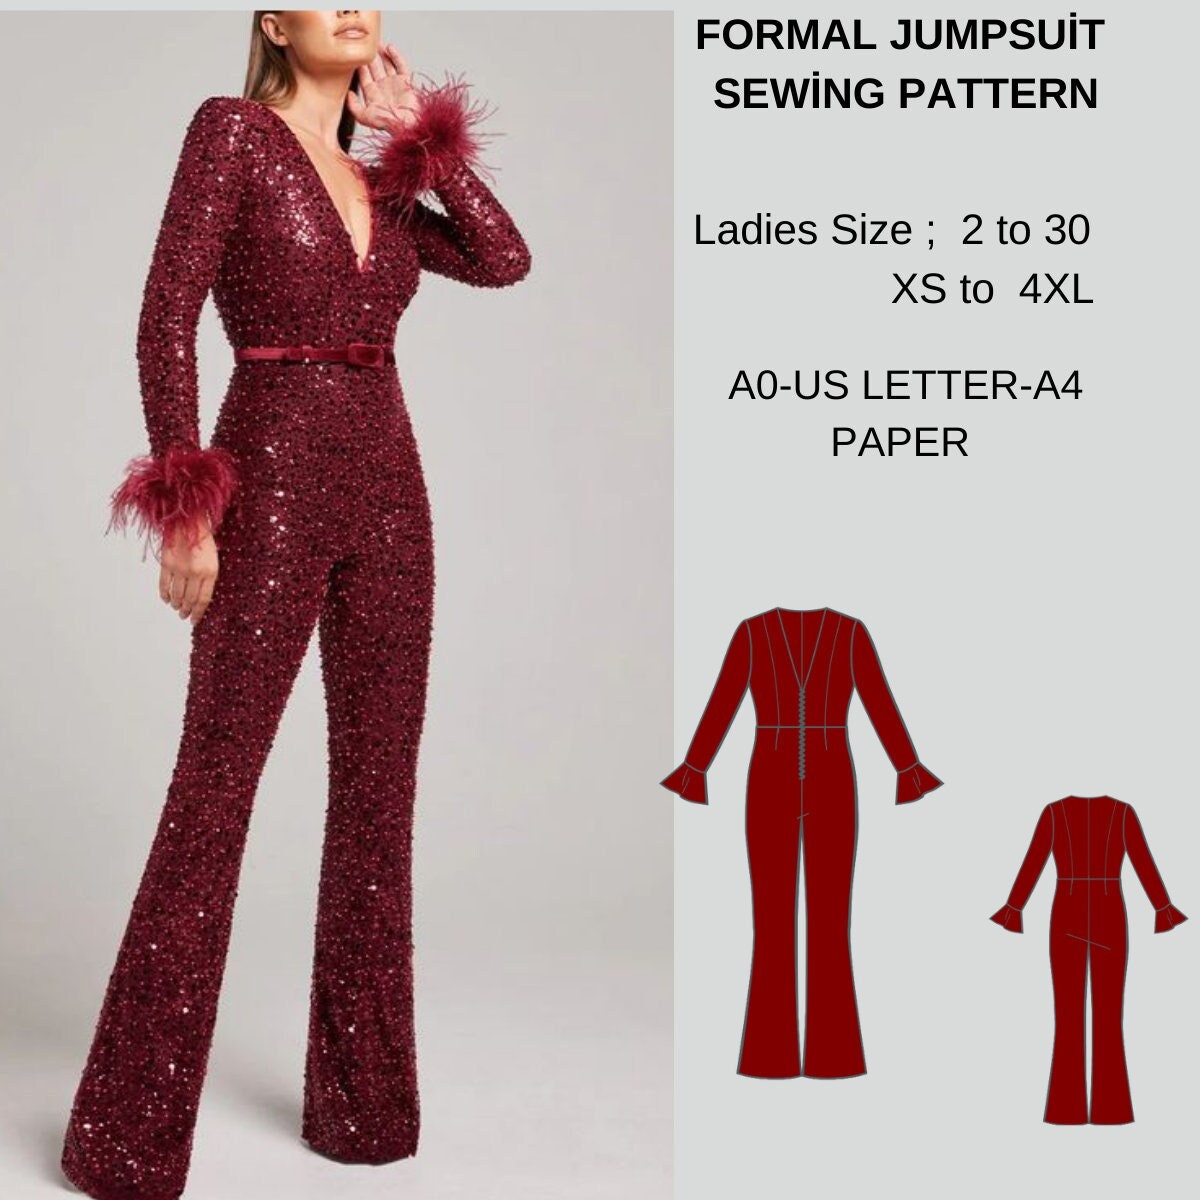 Discover more than 221 long sleeve jumpsuit sewing pattern